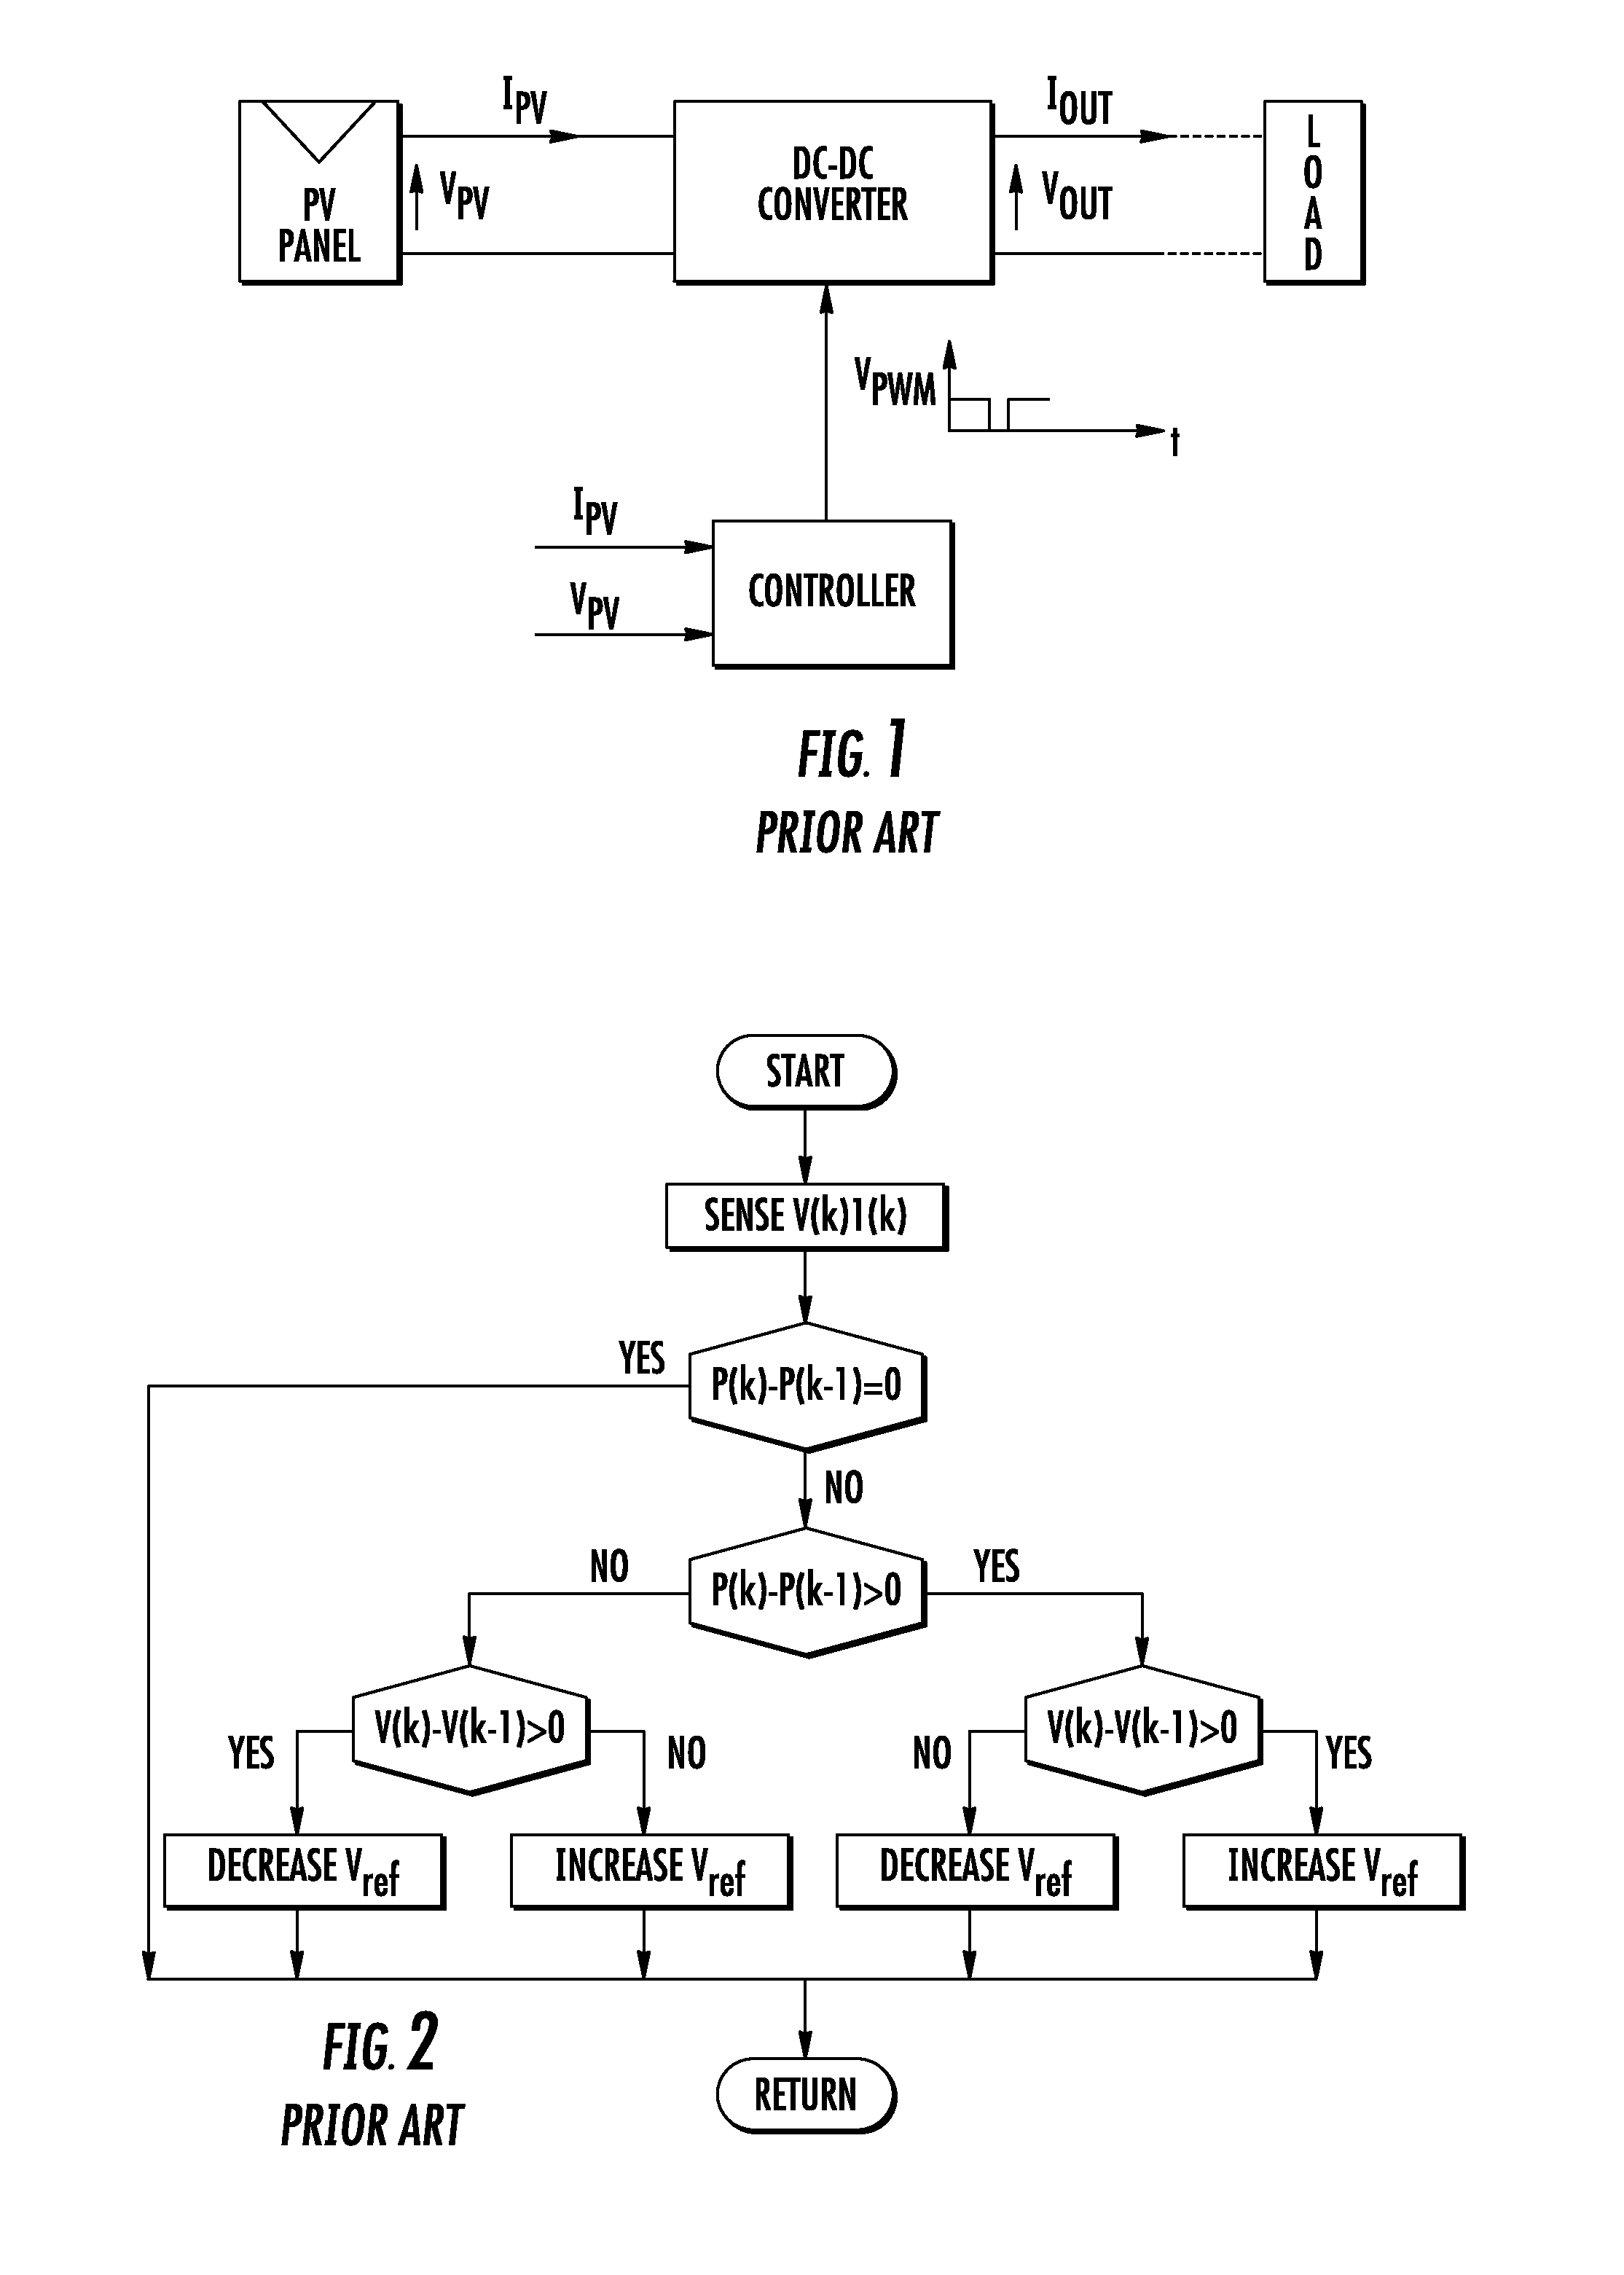 Analog MPPT circuit for photovoltaic power plant